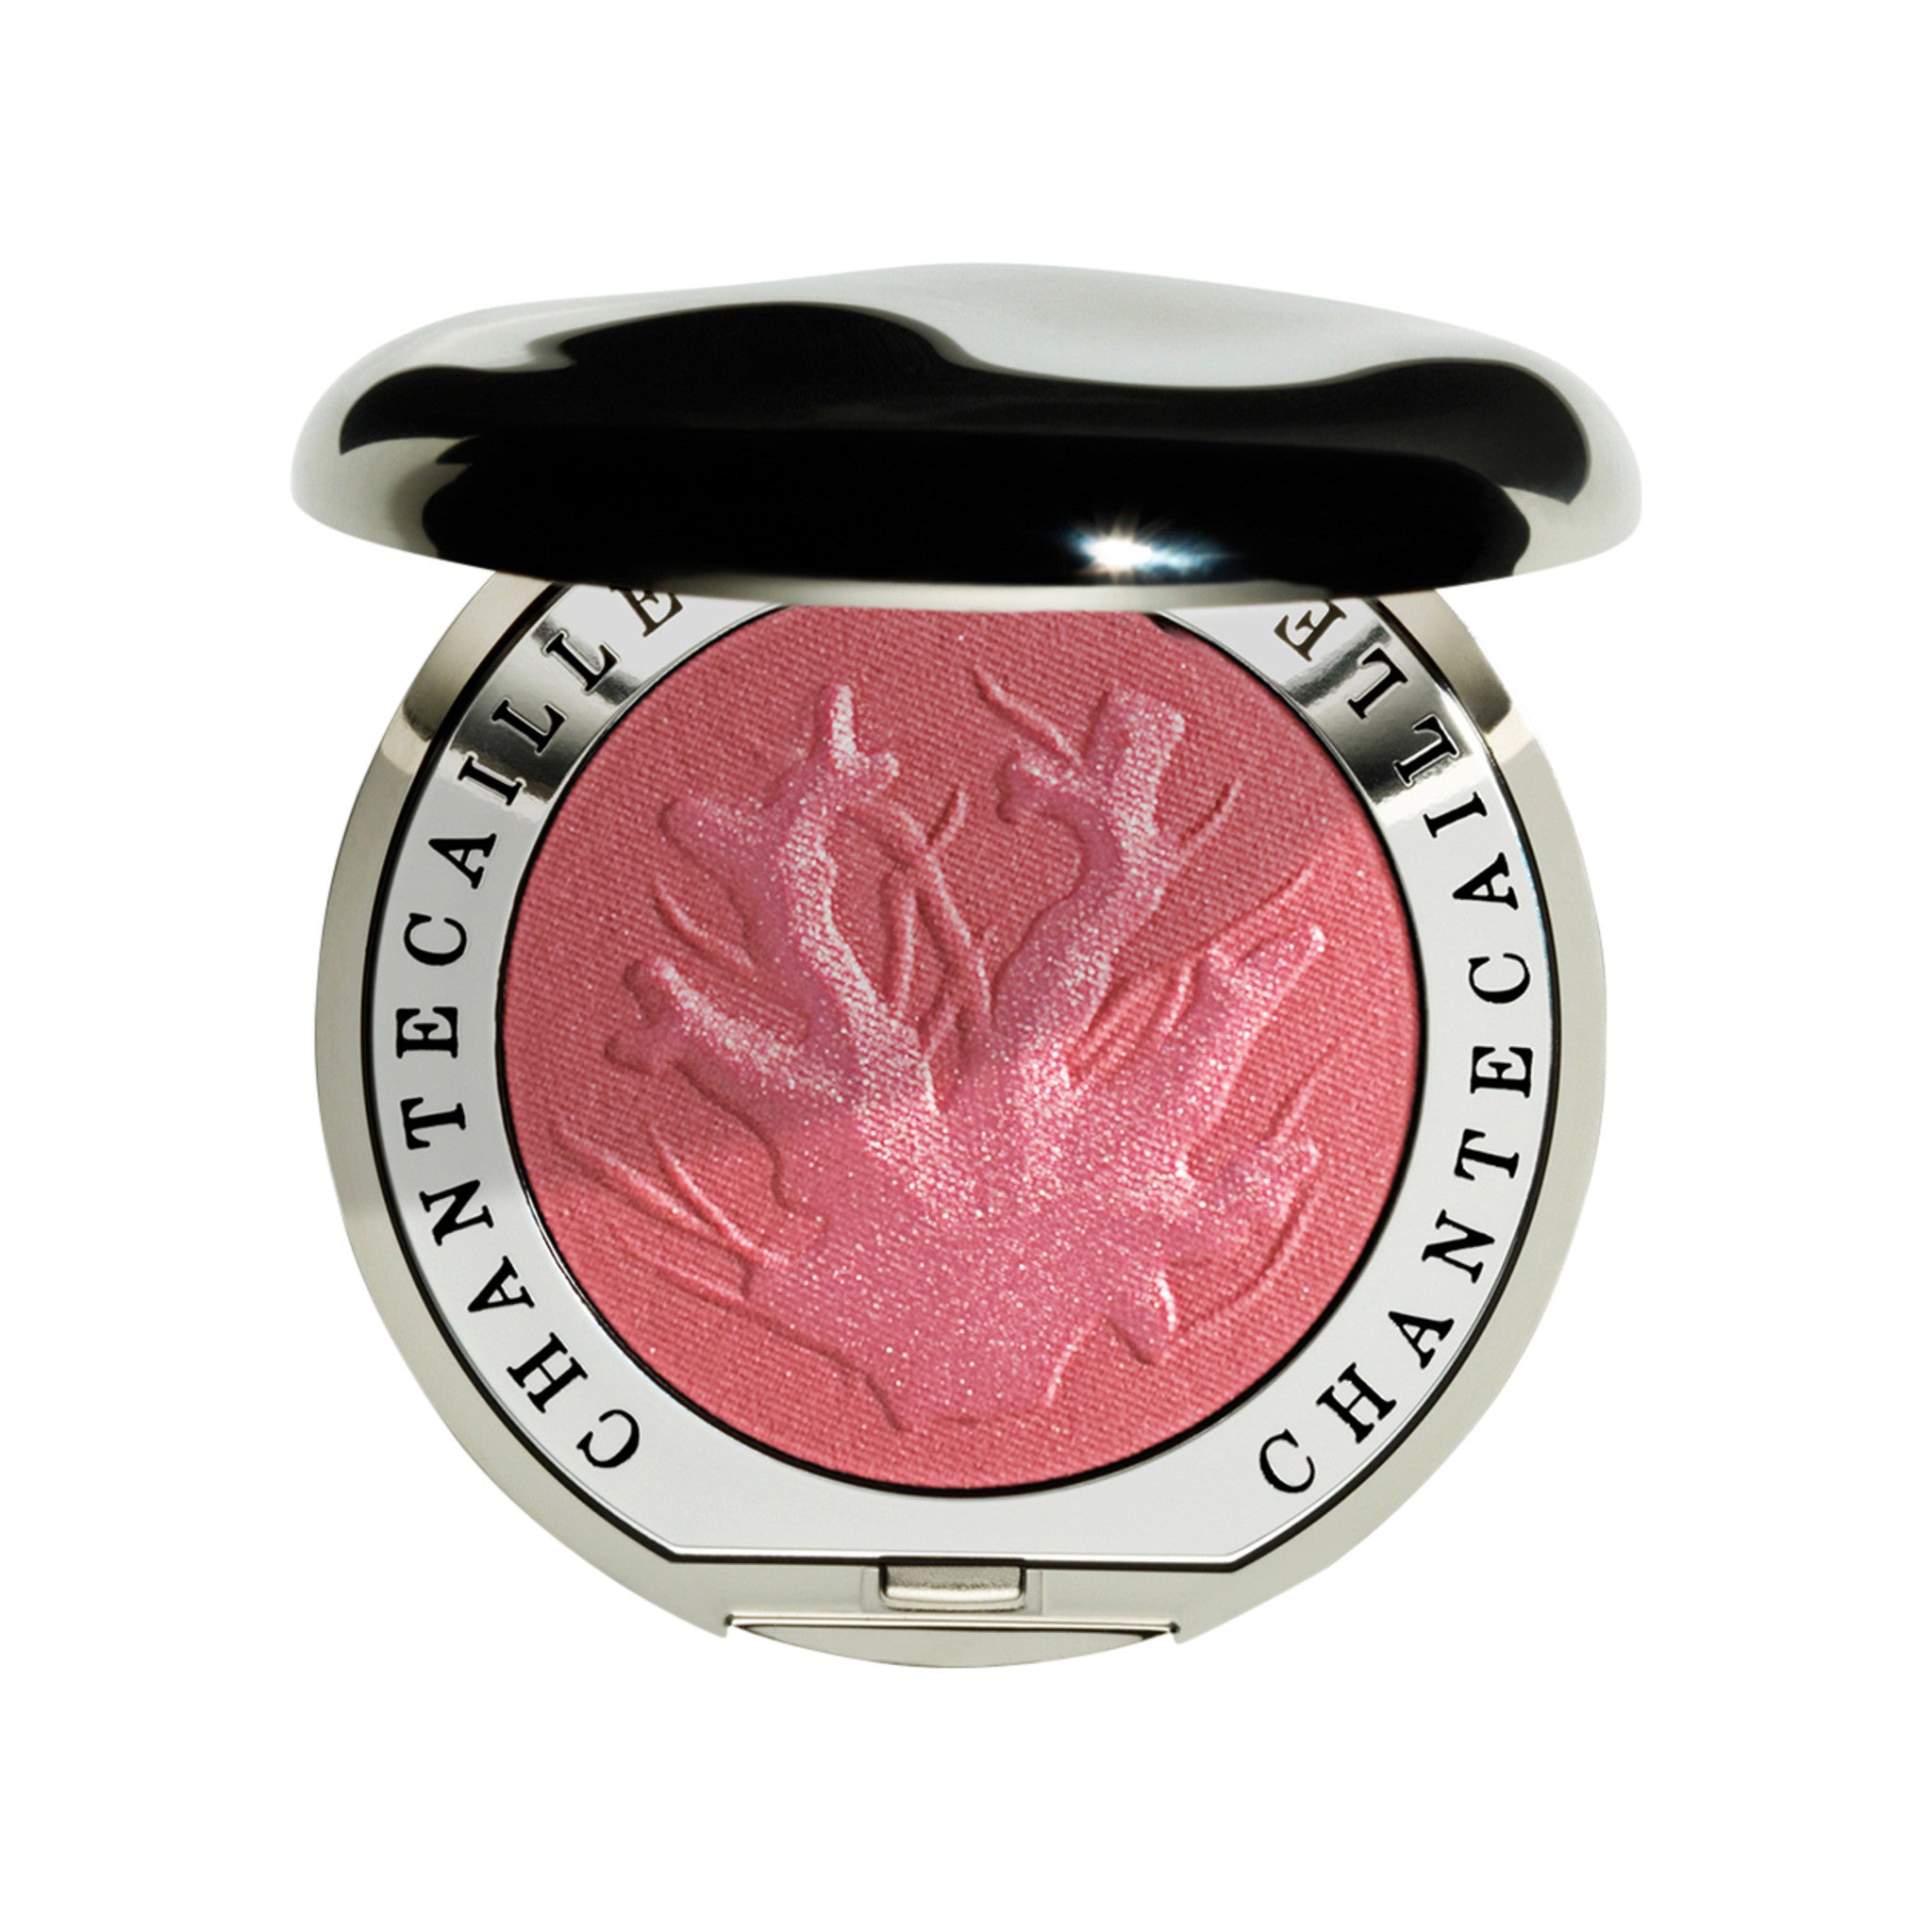 Chantecaille Philanthropy Cheek Shade Color/Shade variant: Laughter with Coral main image. This product is in the color pink